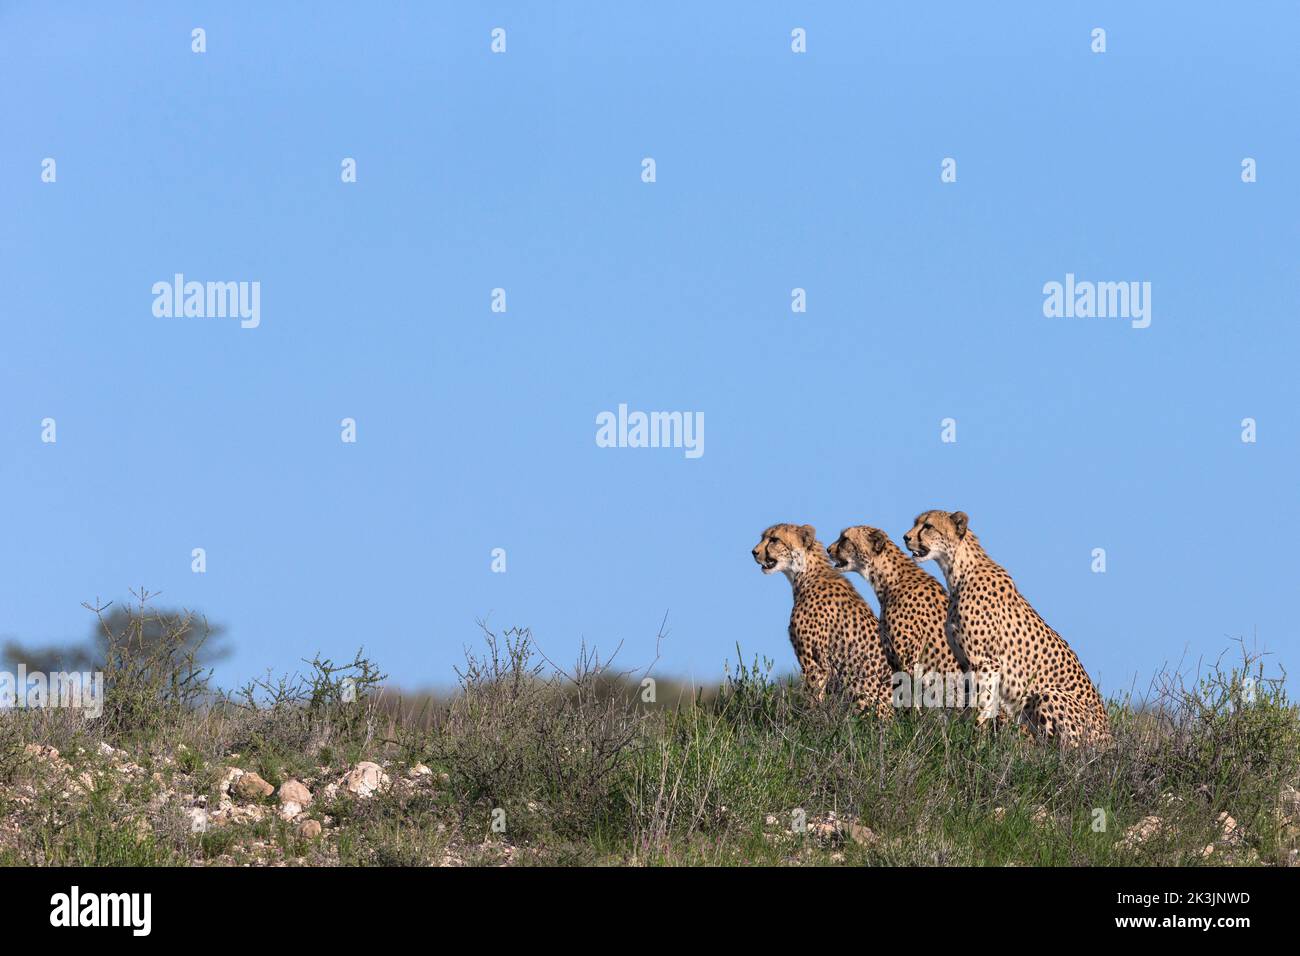 Cheetah (Acinonyx jubatus) mother with young, Kgalagadi transfrontier park, Northern Cape, South Africa, February 2022 Stock Photo